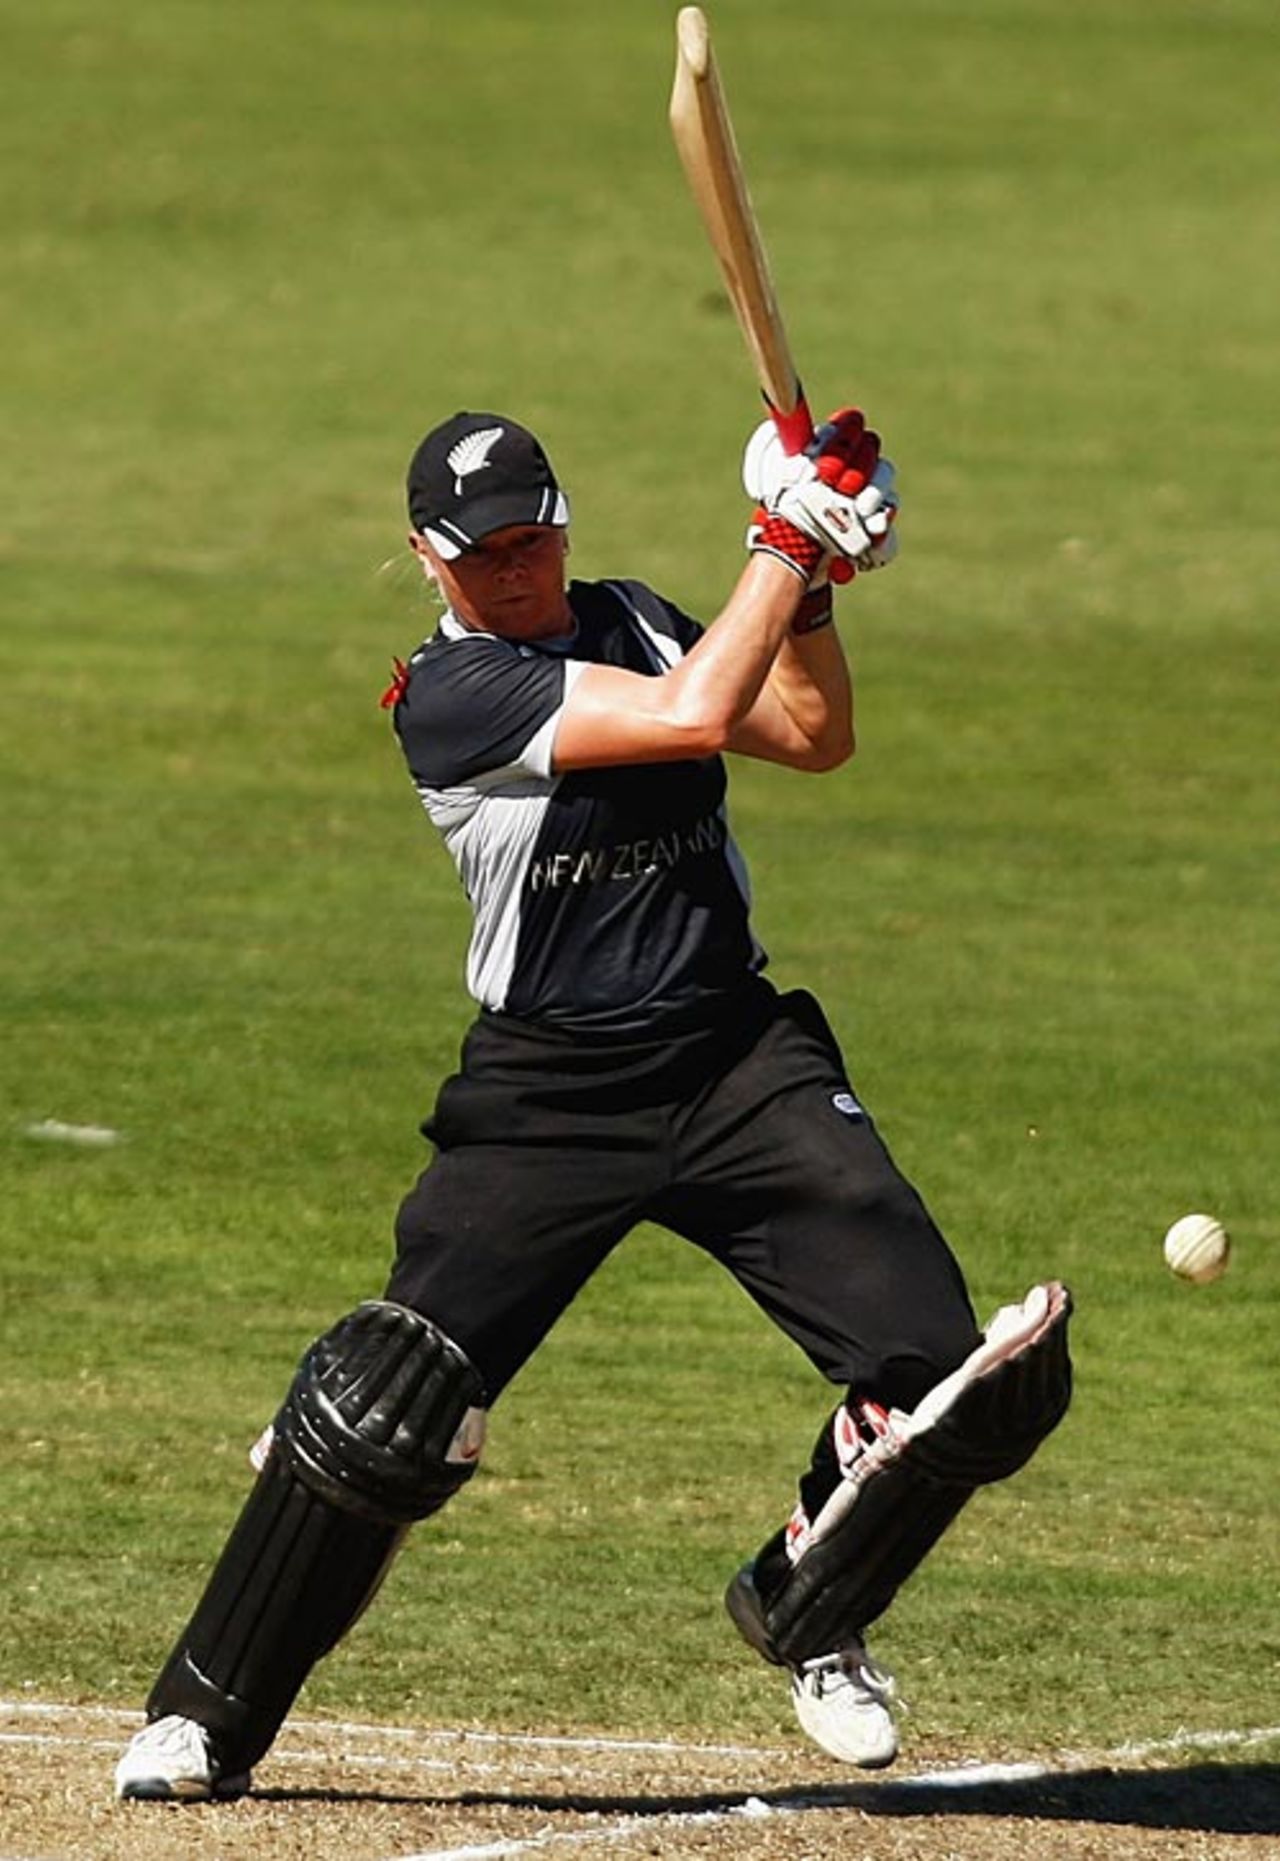 Kate Pulford scored a match-winning 71, India v New Zealand, Super Six, women's World Cup, Sydney, March 17, 2009